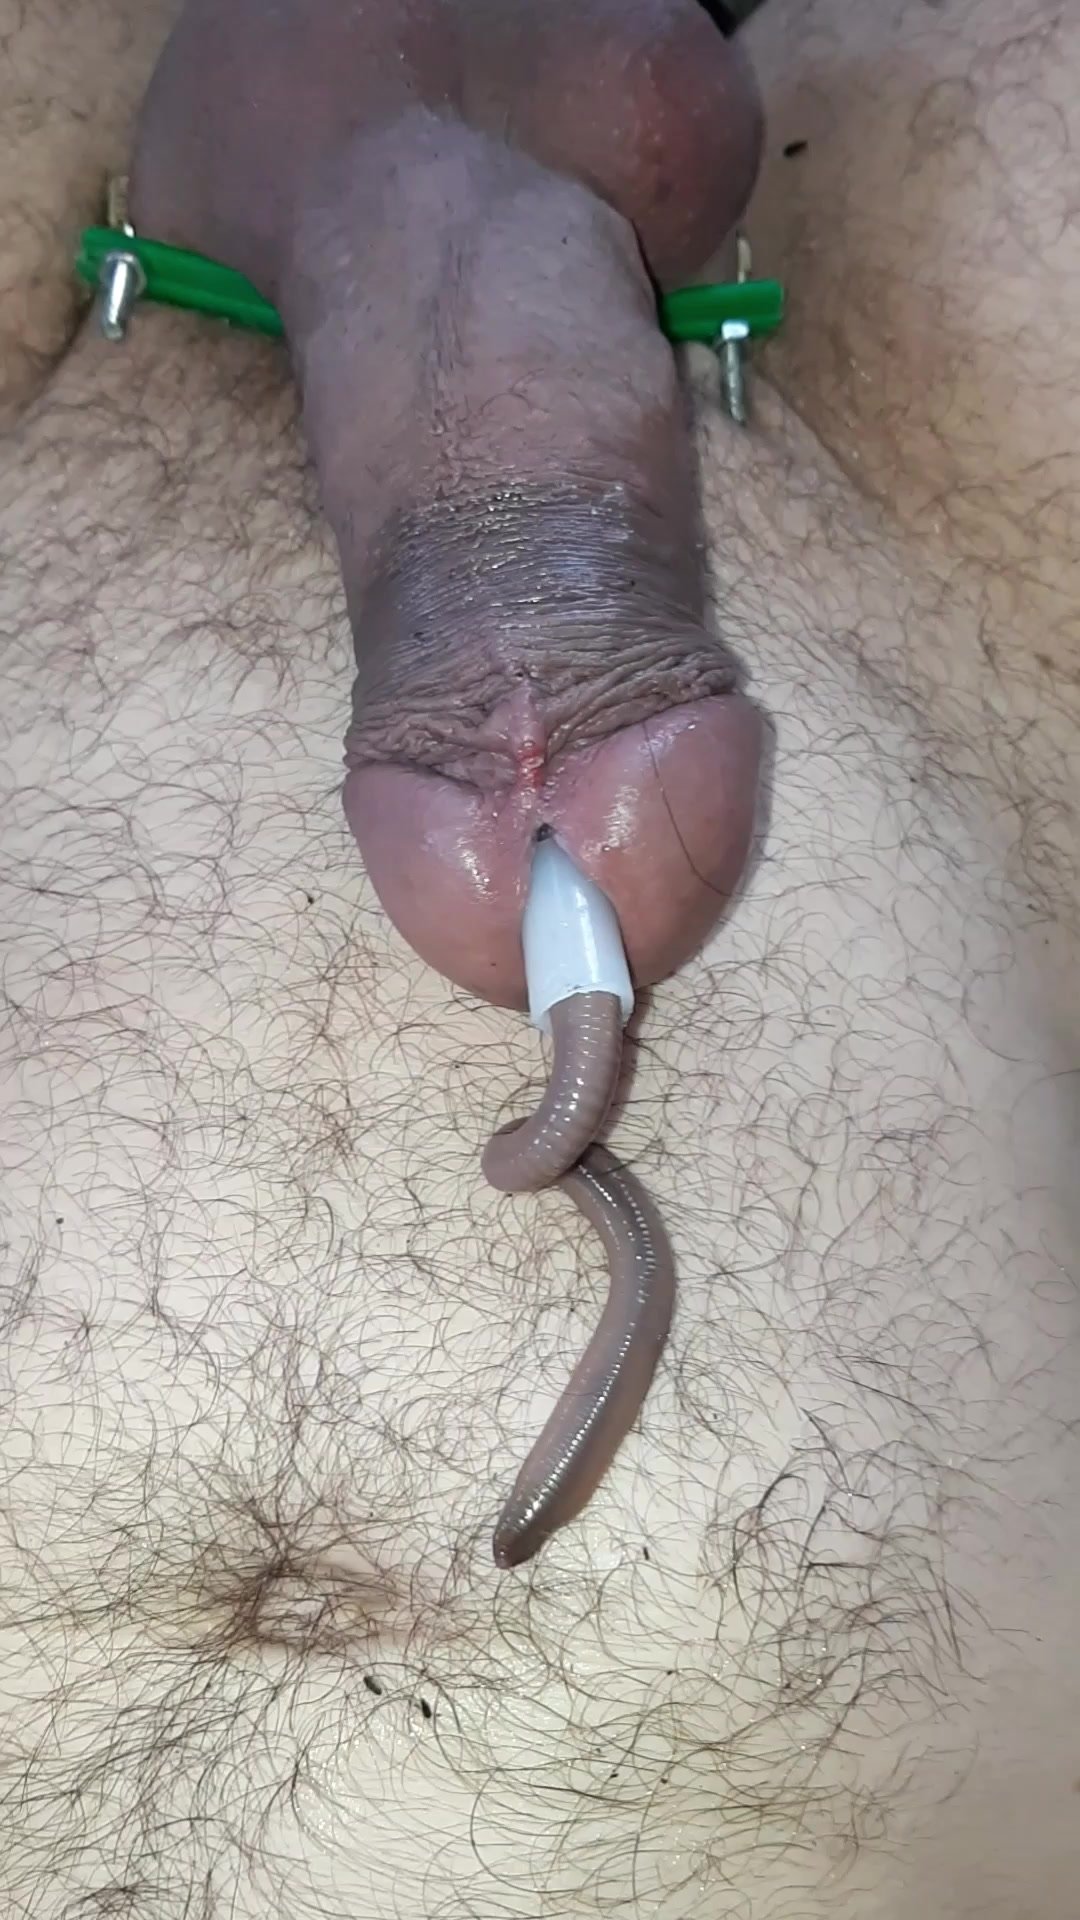 A big, fat worm in cock